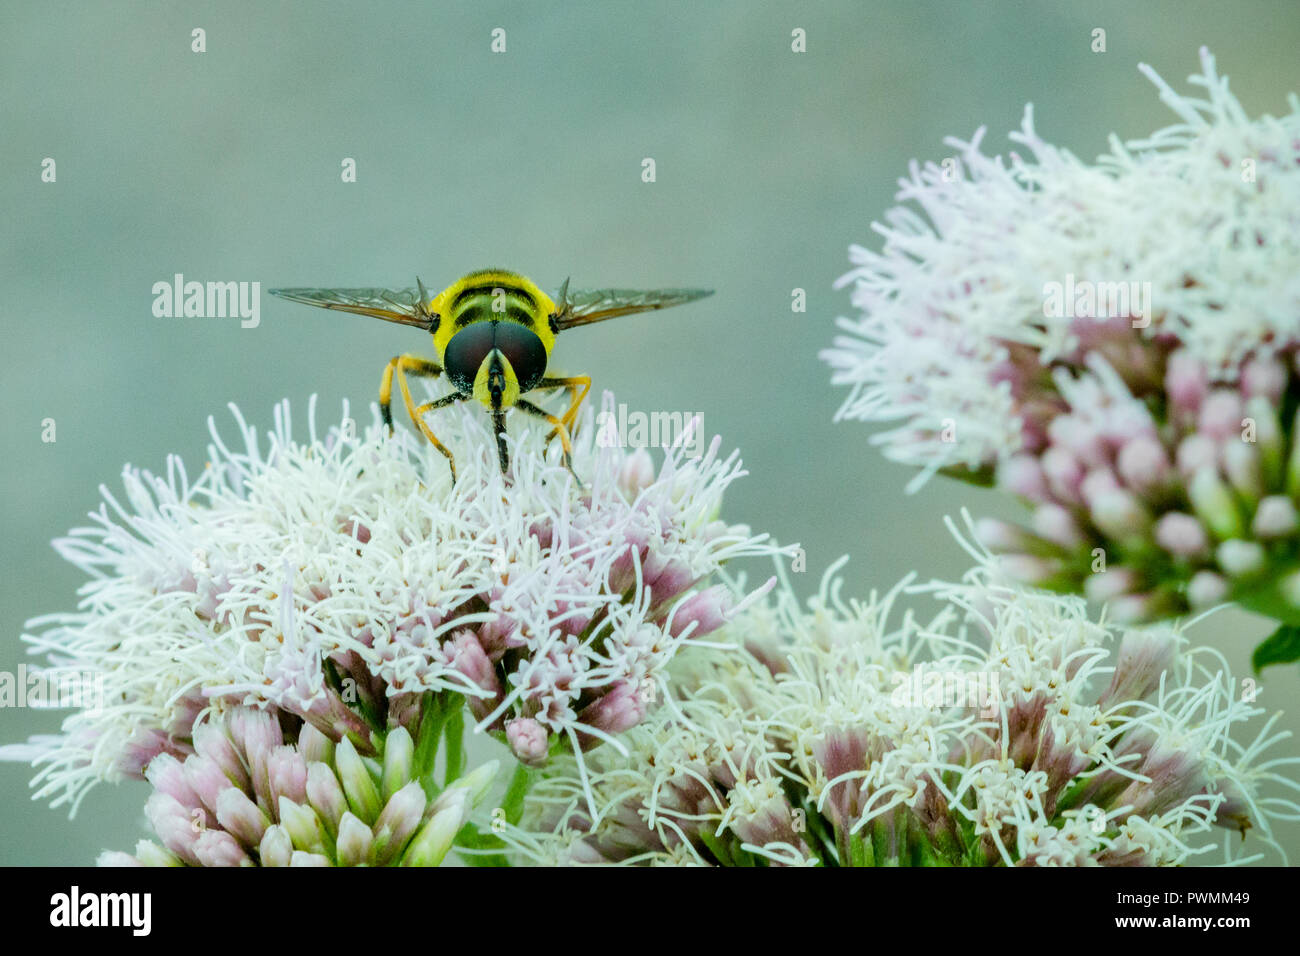 Close up of a Black and Yellow Hoverfly feeding on nectar on white flowers in the garden Stock Photo